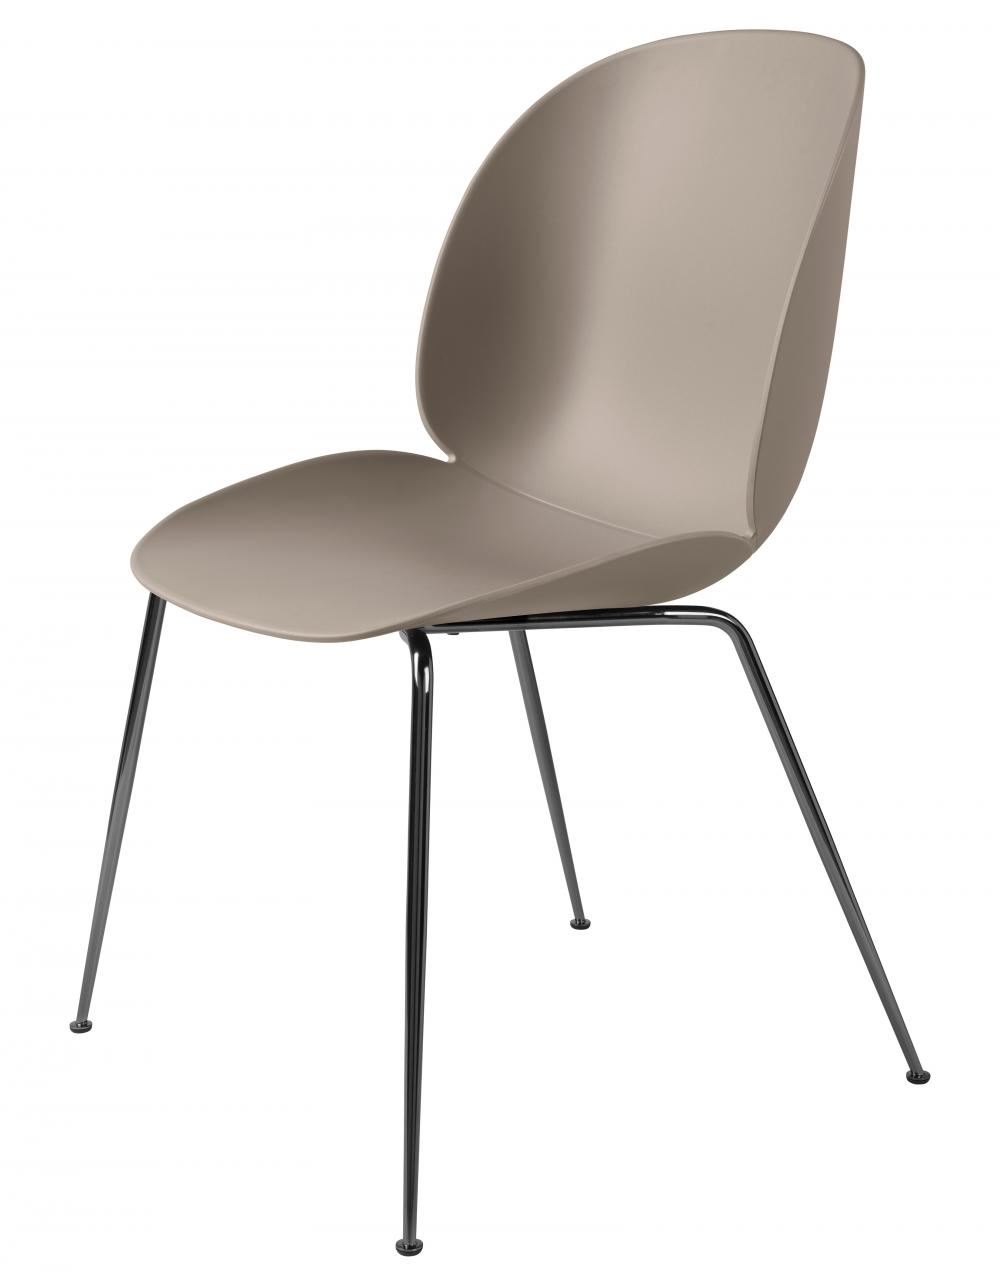 Beetle Dining Chair Conic Base Unupholstered Black Chrome Base New Beige